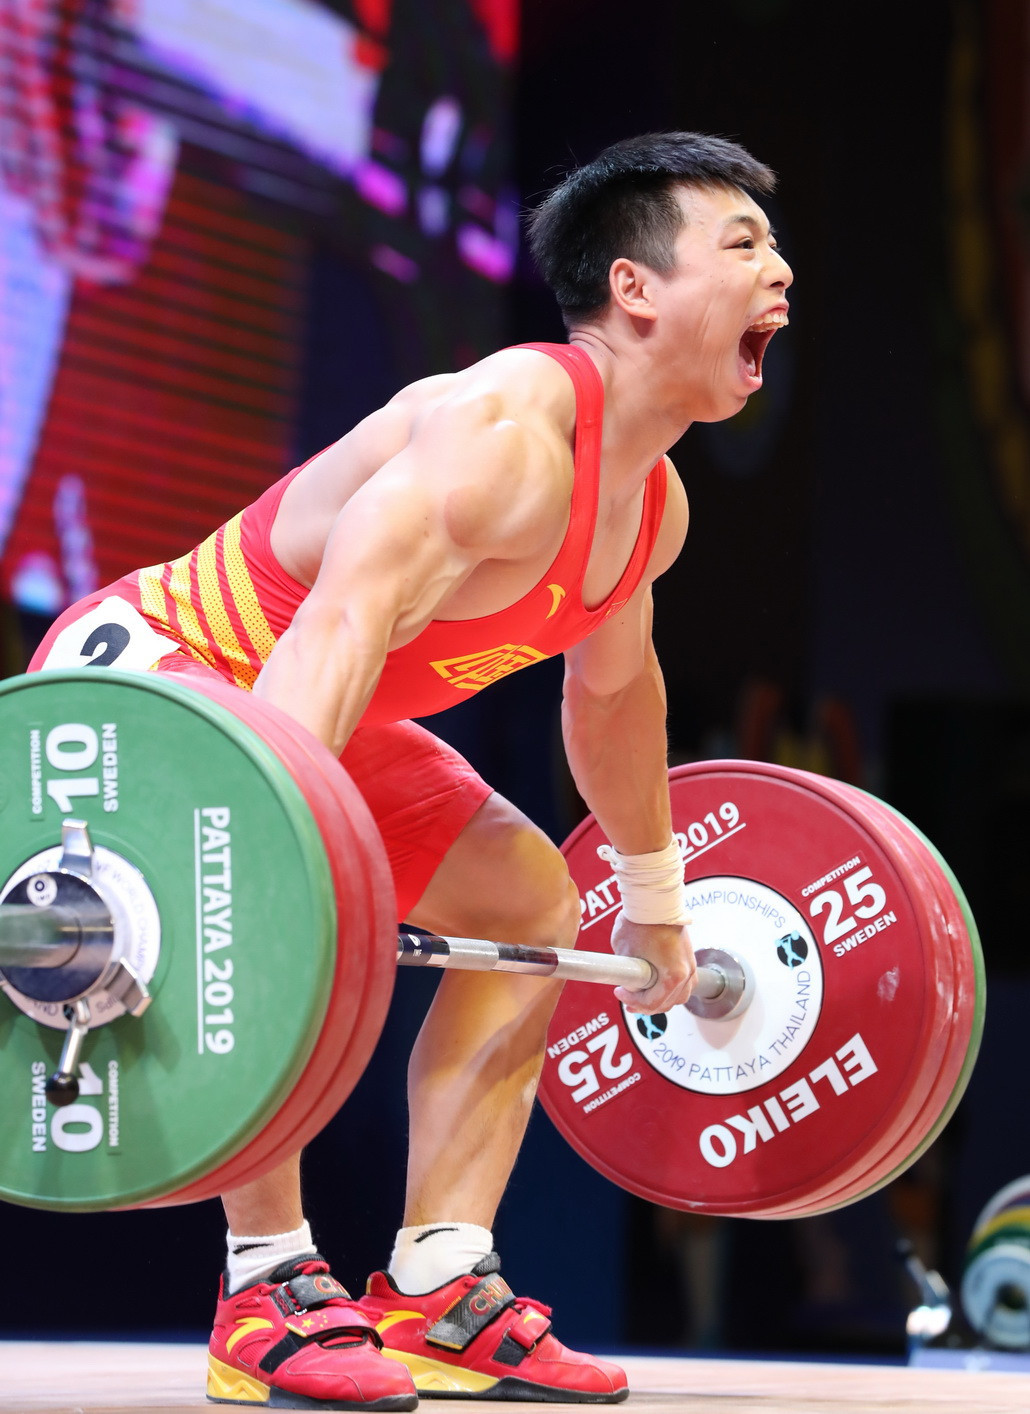 Defending champion Chen Lijun triumphed overall with 337kg, despite not winning either the snatch or the clean and jerk competitions ©IWF